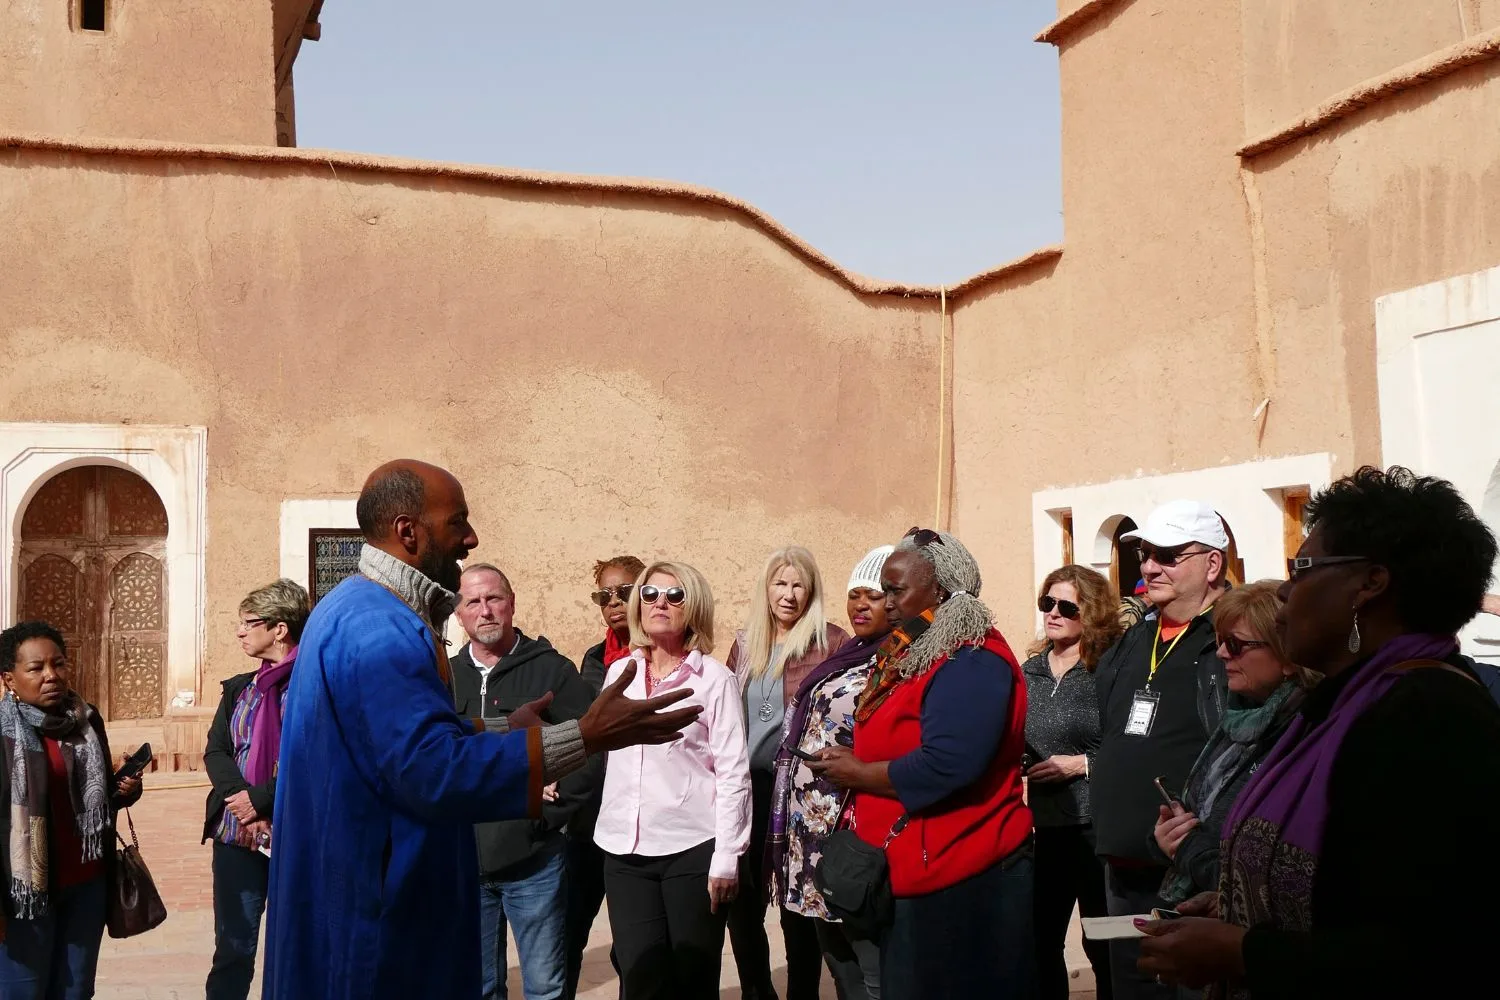 A local guide leads his tour group in Tangier, Morocco